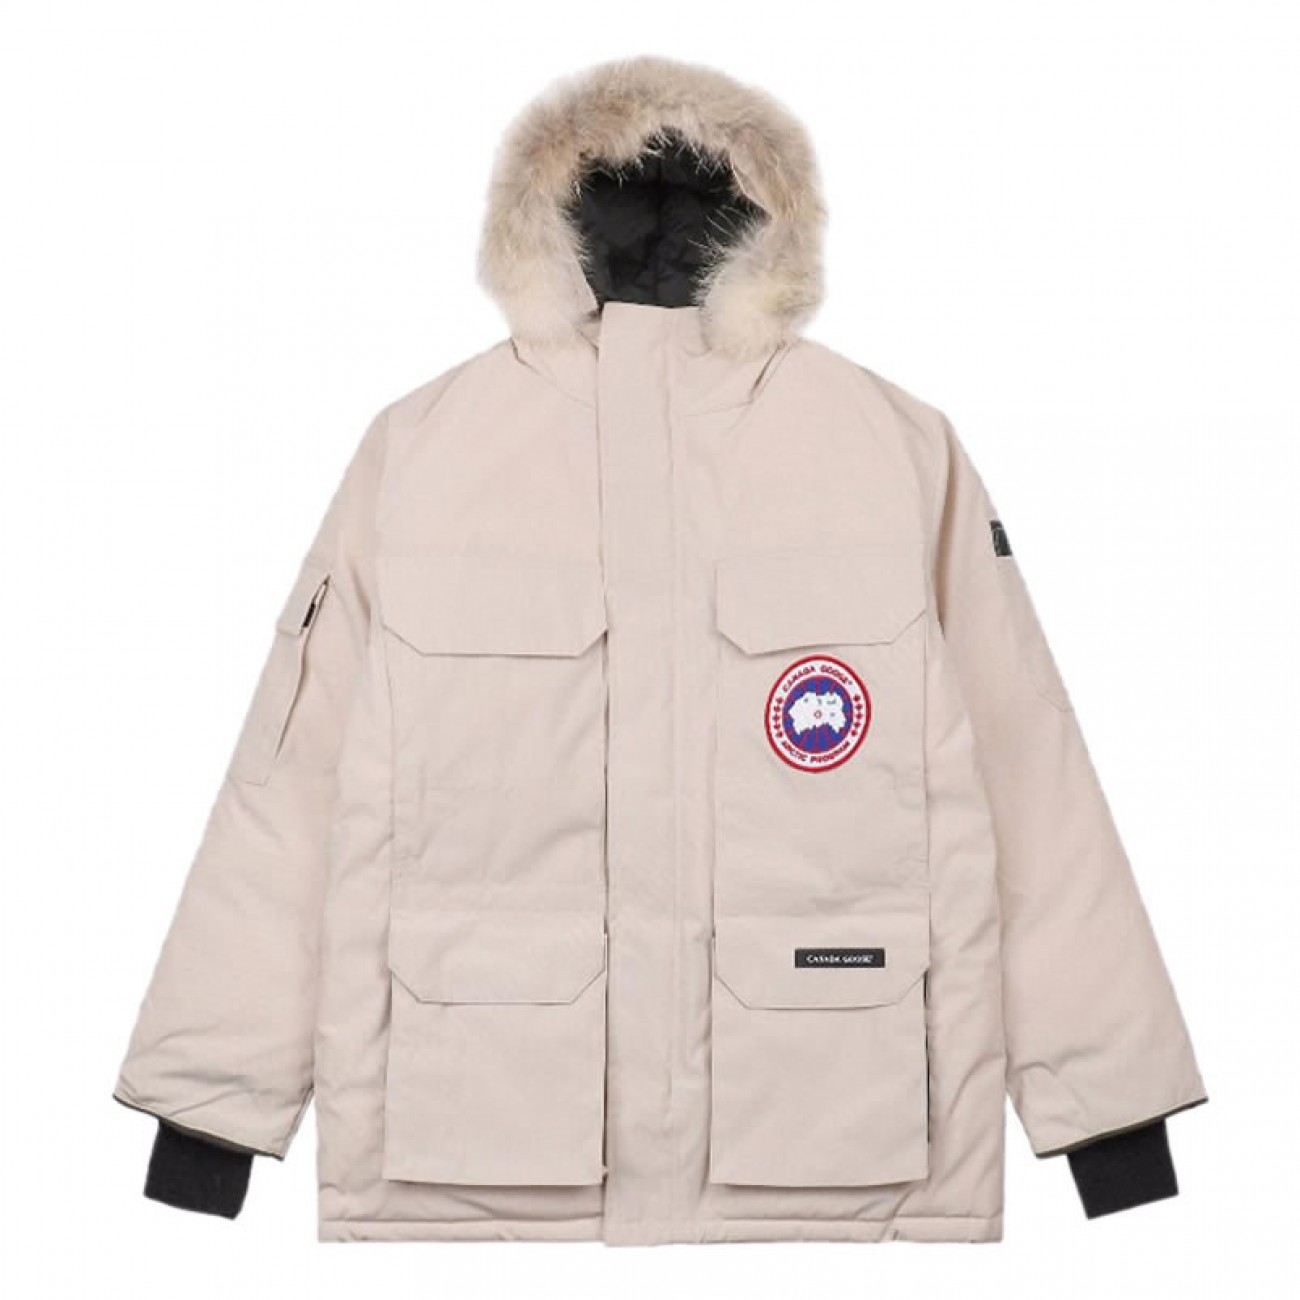 08 ' Canada Goose '19FW Expedition 4660MA Down Jacket Coat "Cream White"